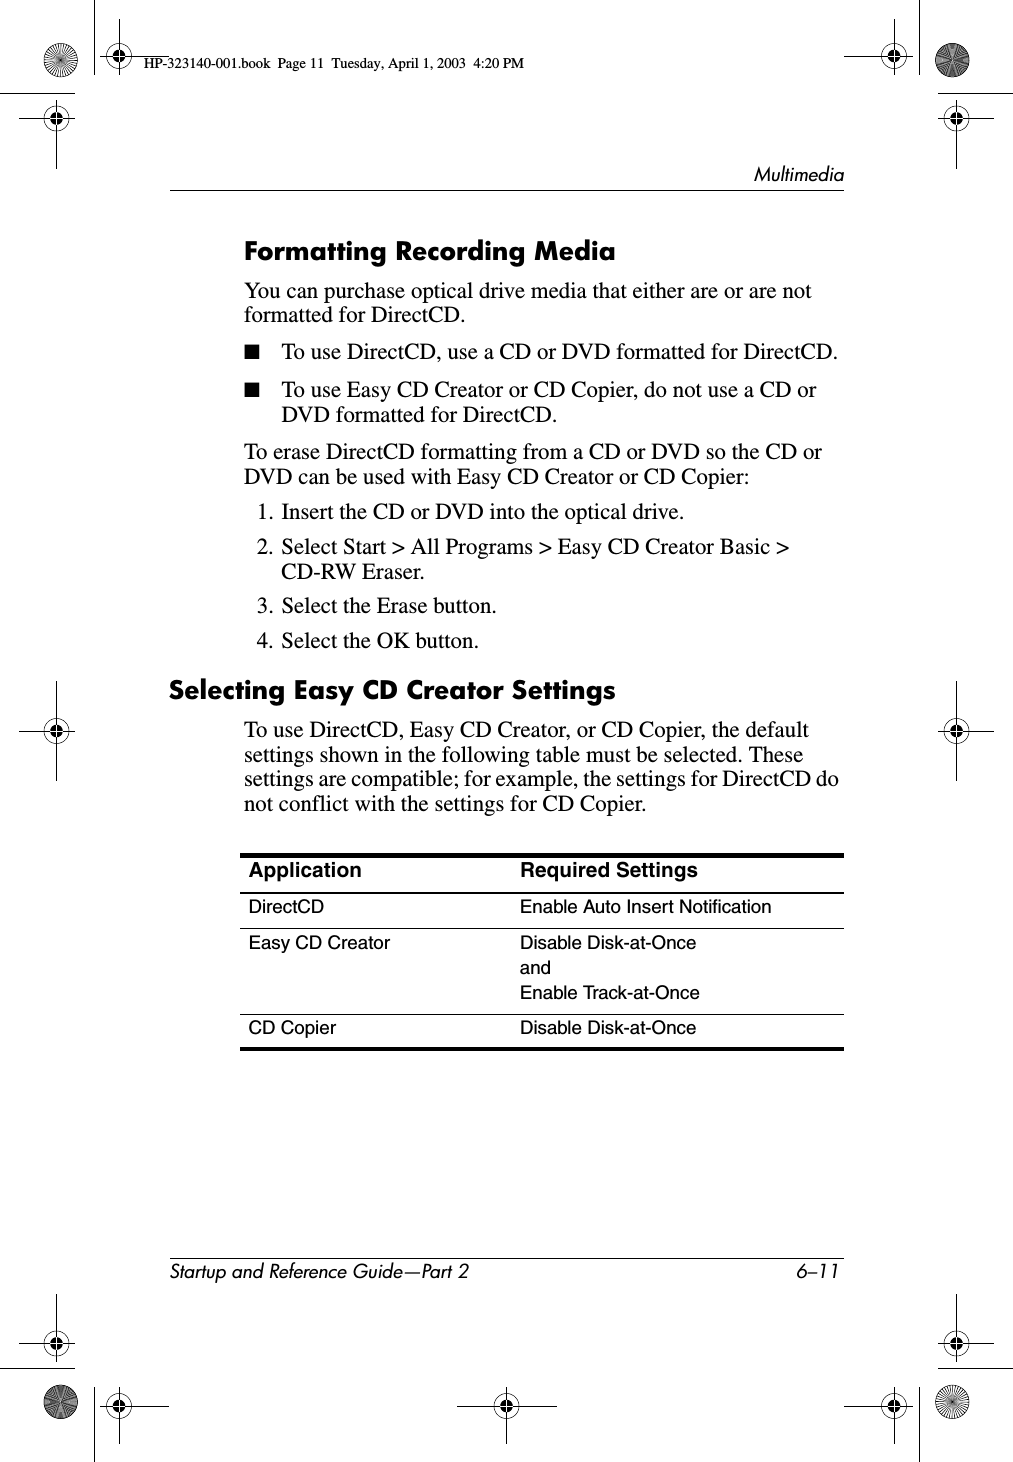 MultimediaStartup and Reference Guide—Part 2 6–11Formatting Recording MediaYou can purchase optical drive media that either are or are not formatted for DirectCD.■To use DirectCD, use a CD or DVD formatted for DirectCD.■To use Easy CD Creator or CD Copier, do not use a CD or DVD formatted for DirectCD.To erase DirectCD formatting from a CD or DVD so the CD or DVD can be used with Easy CD Creator or CD Copier:1. Insert the CD or DVD into the optical drive. 2. Select Start &gt; All Programs &gt; Easy CD Creator Basic &gt; CD-RW Eraser.3. Select the Erase button.4. Select the OK button.Selecting Easy CD Creator SettingsTo use DirectCD, Easy CD Creator, or CD Copier, the default settings shown in the following table must be selected. These settings are compatible; for example, the settings for DirectCD do not conflict with the settings for CD Copier.Application Required Settings DirectCD Enable Auto Insert NotificationEasy CD Creator Disable Disk-at-OnceandEnable Track-at-OnceCD Copier Disable Disk-at-OnceHP-323140-001.book  Page 11  Tuesday, April 1, 2003  4:20 PM